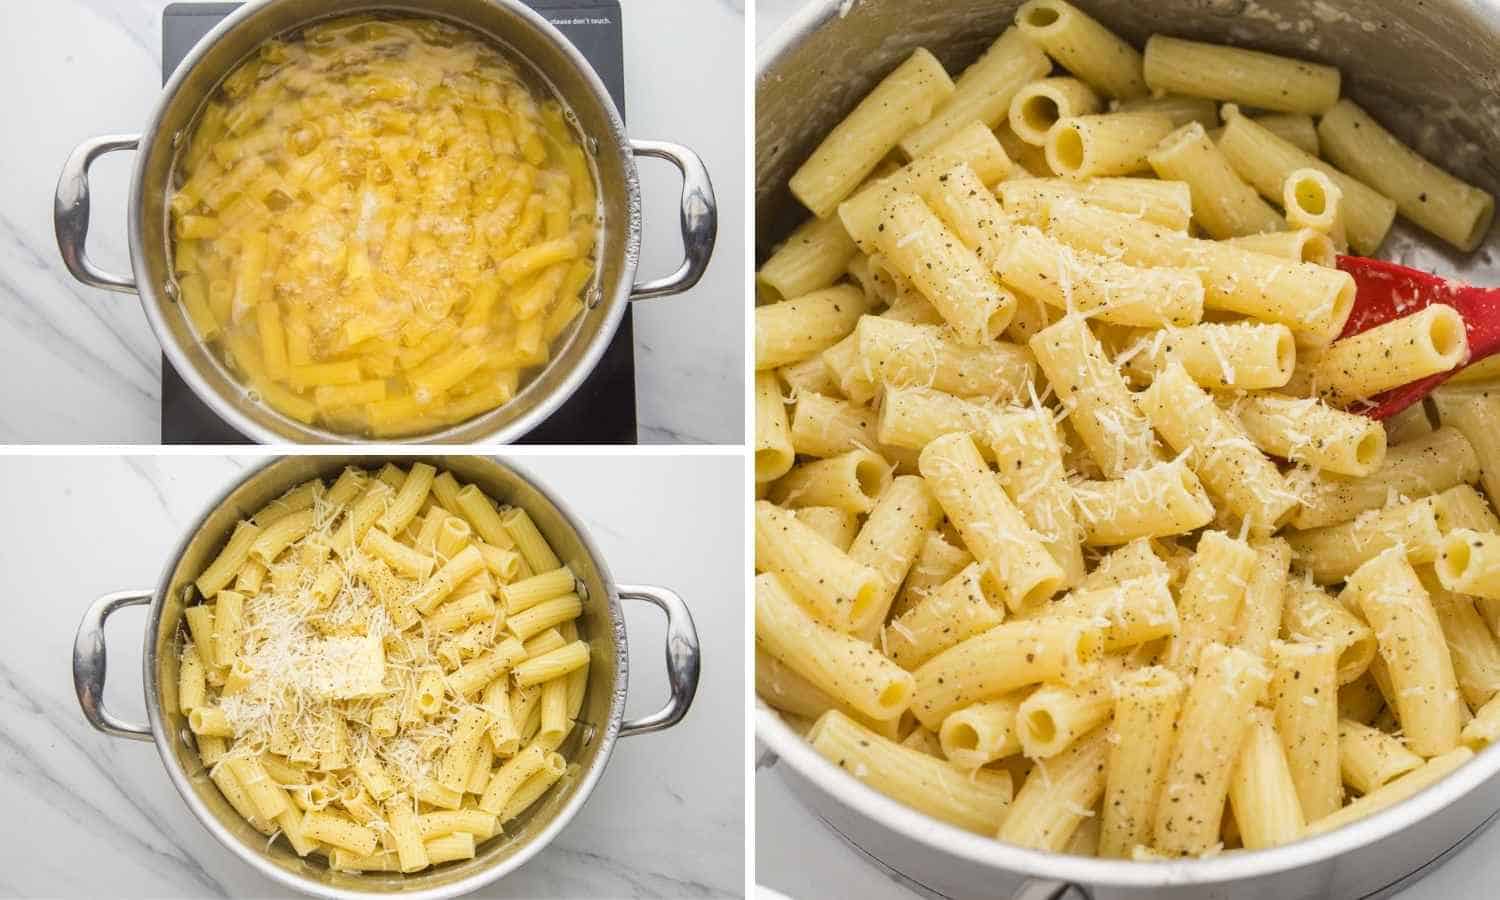 Collage of three images showing how to make buttered noodles